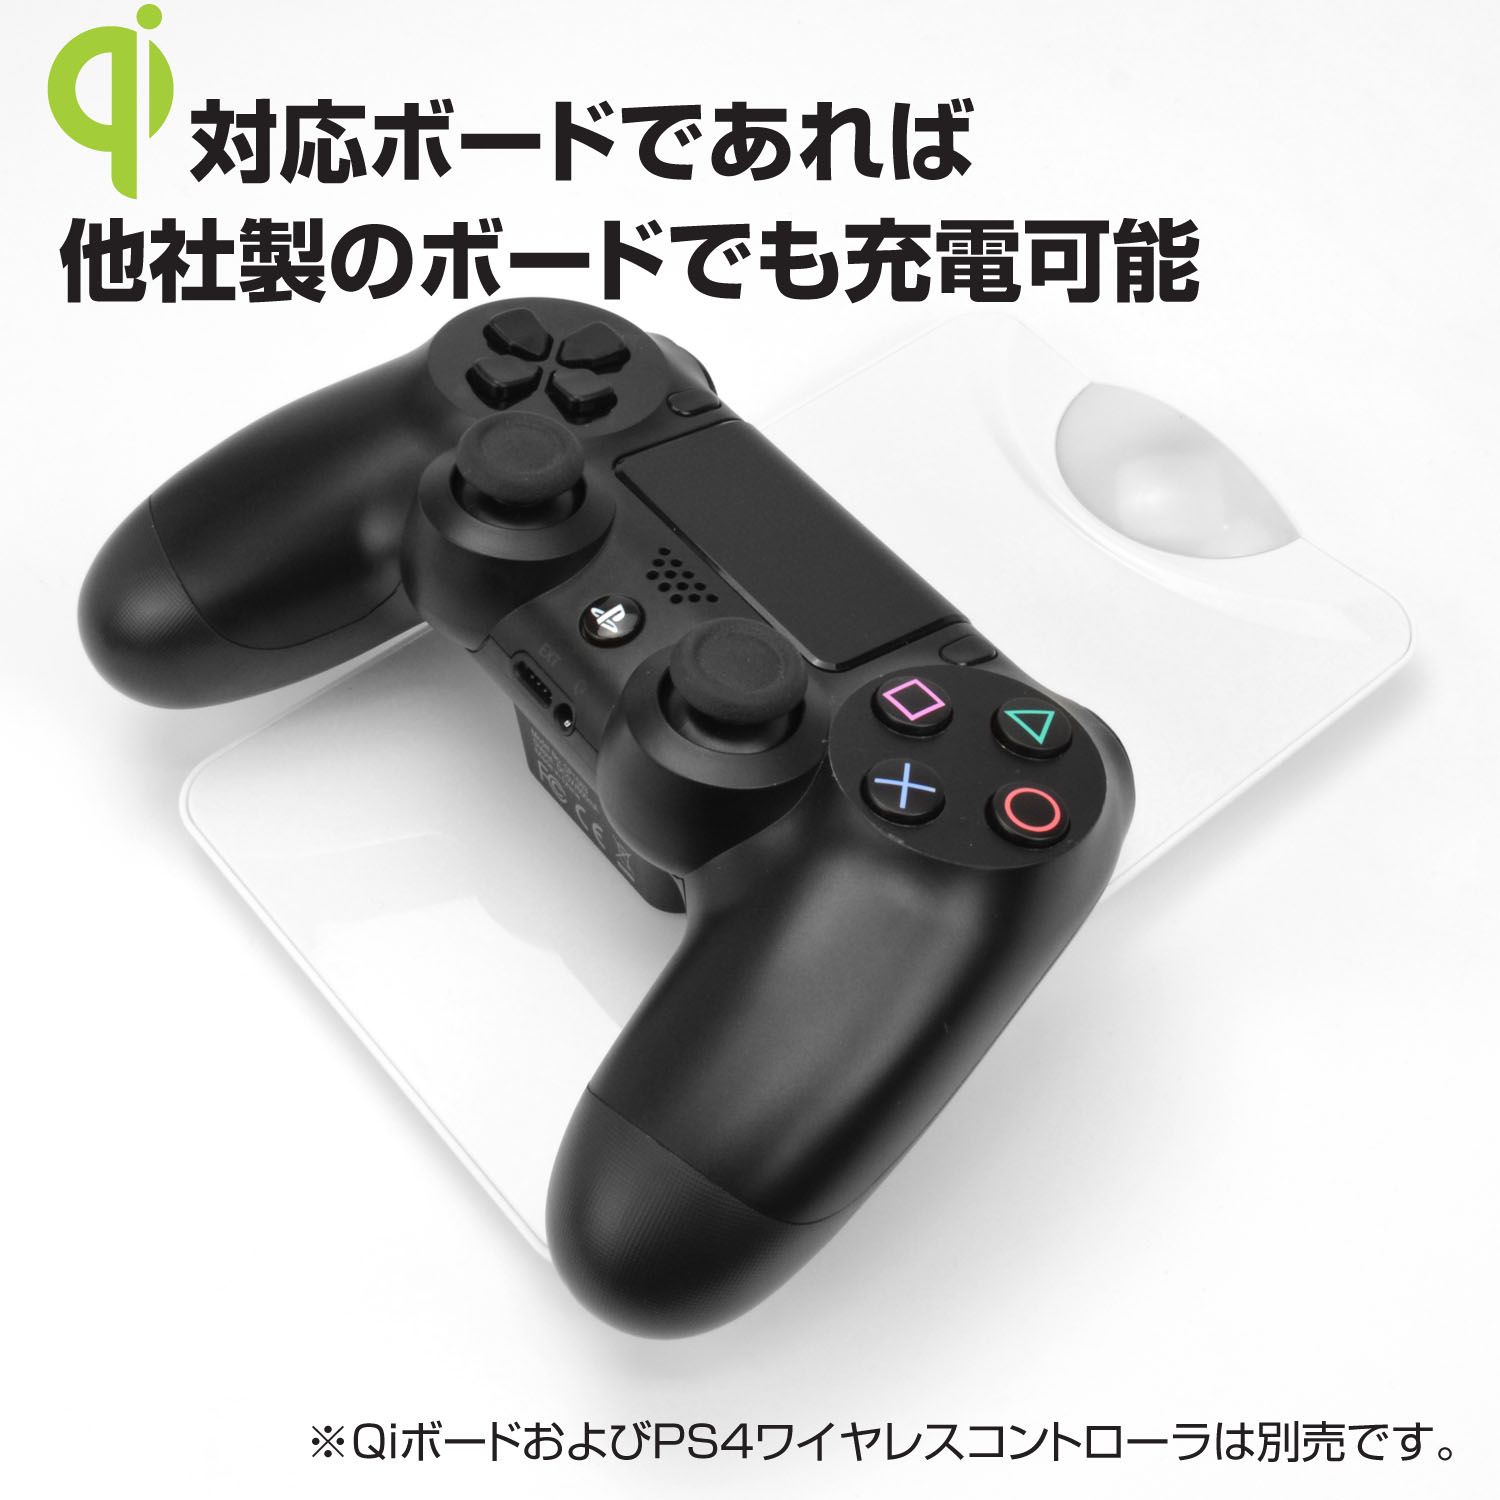 handicap Afleiden jeans PS4 Gets Qi Compatible Inductive Wireless Charger to Help With Your DualShock  4's Battery